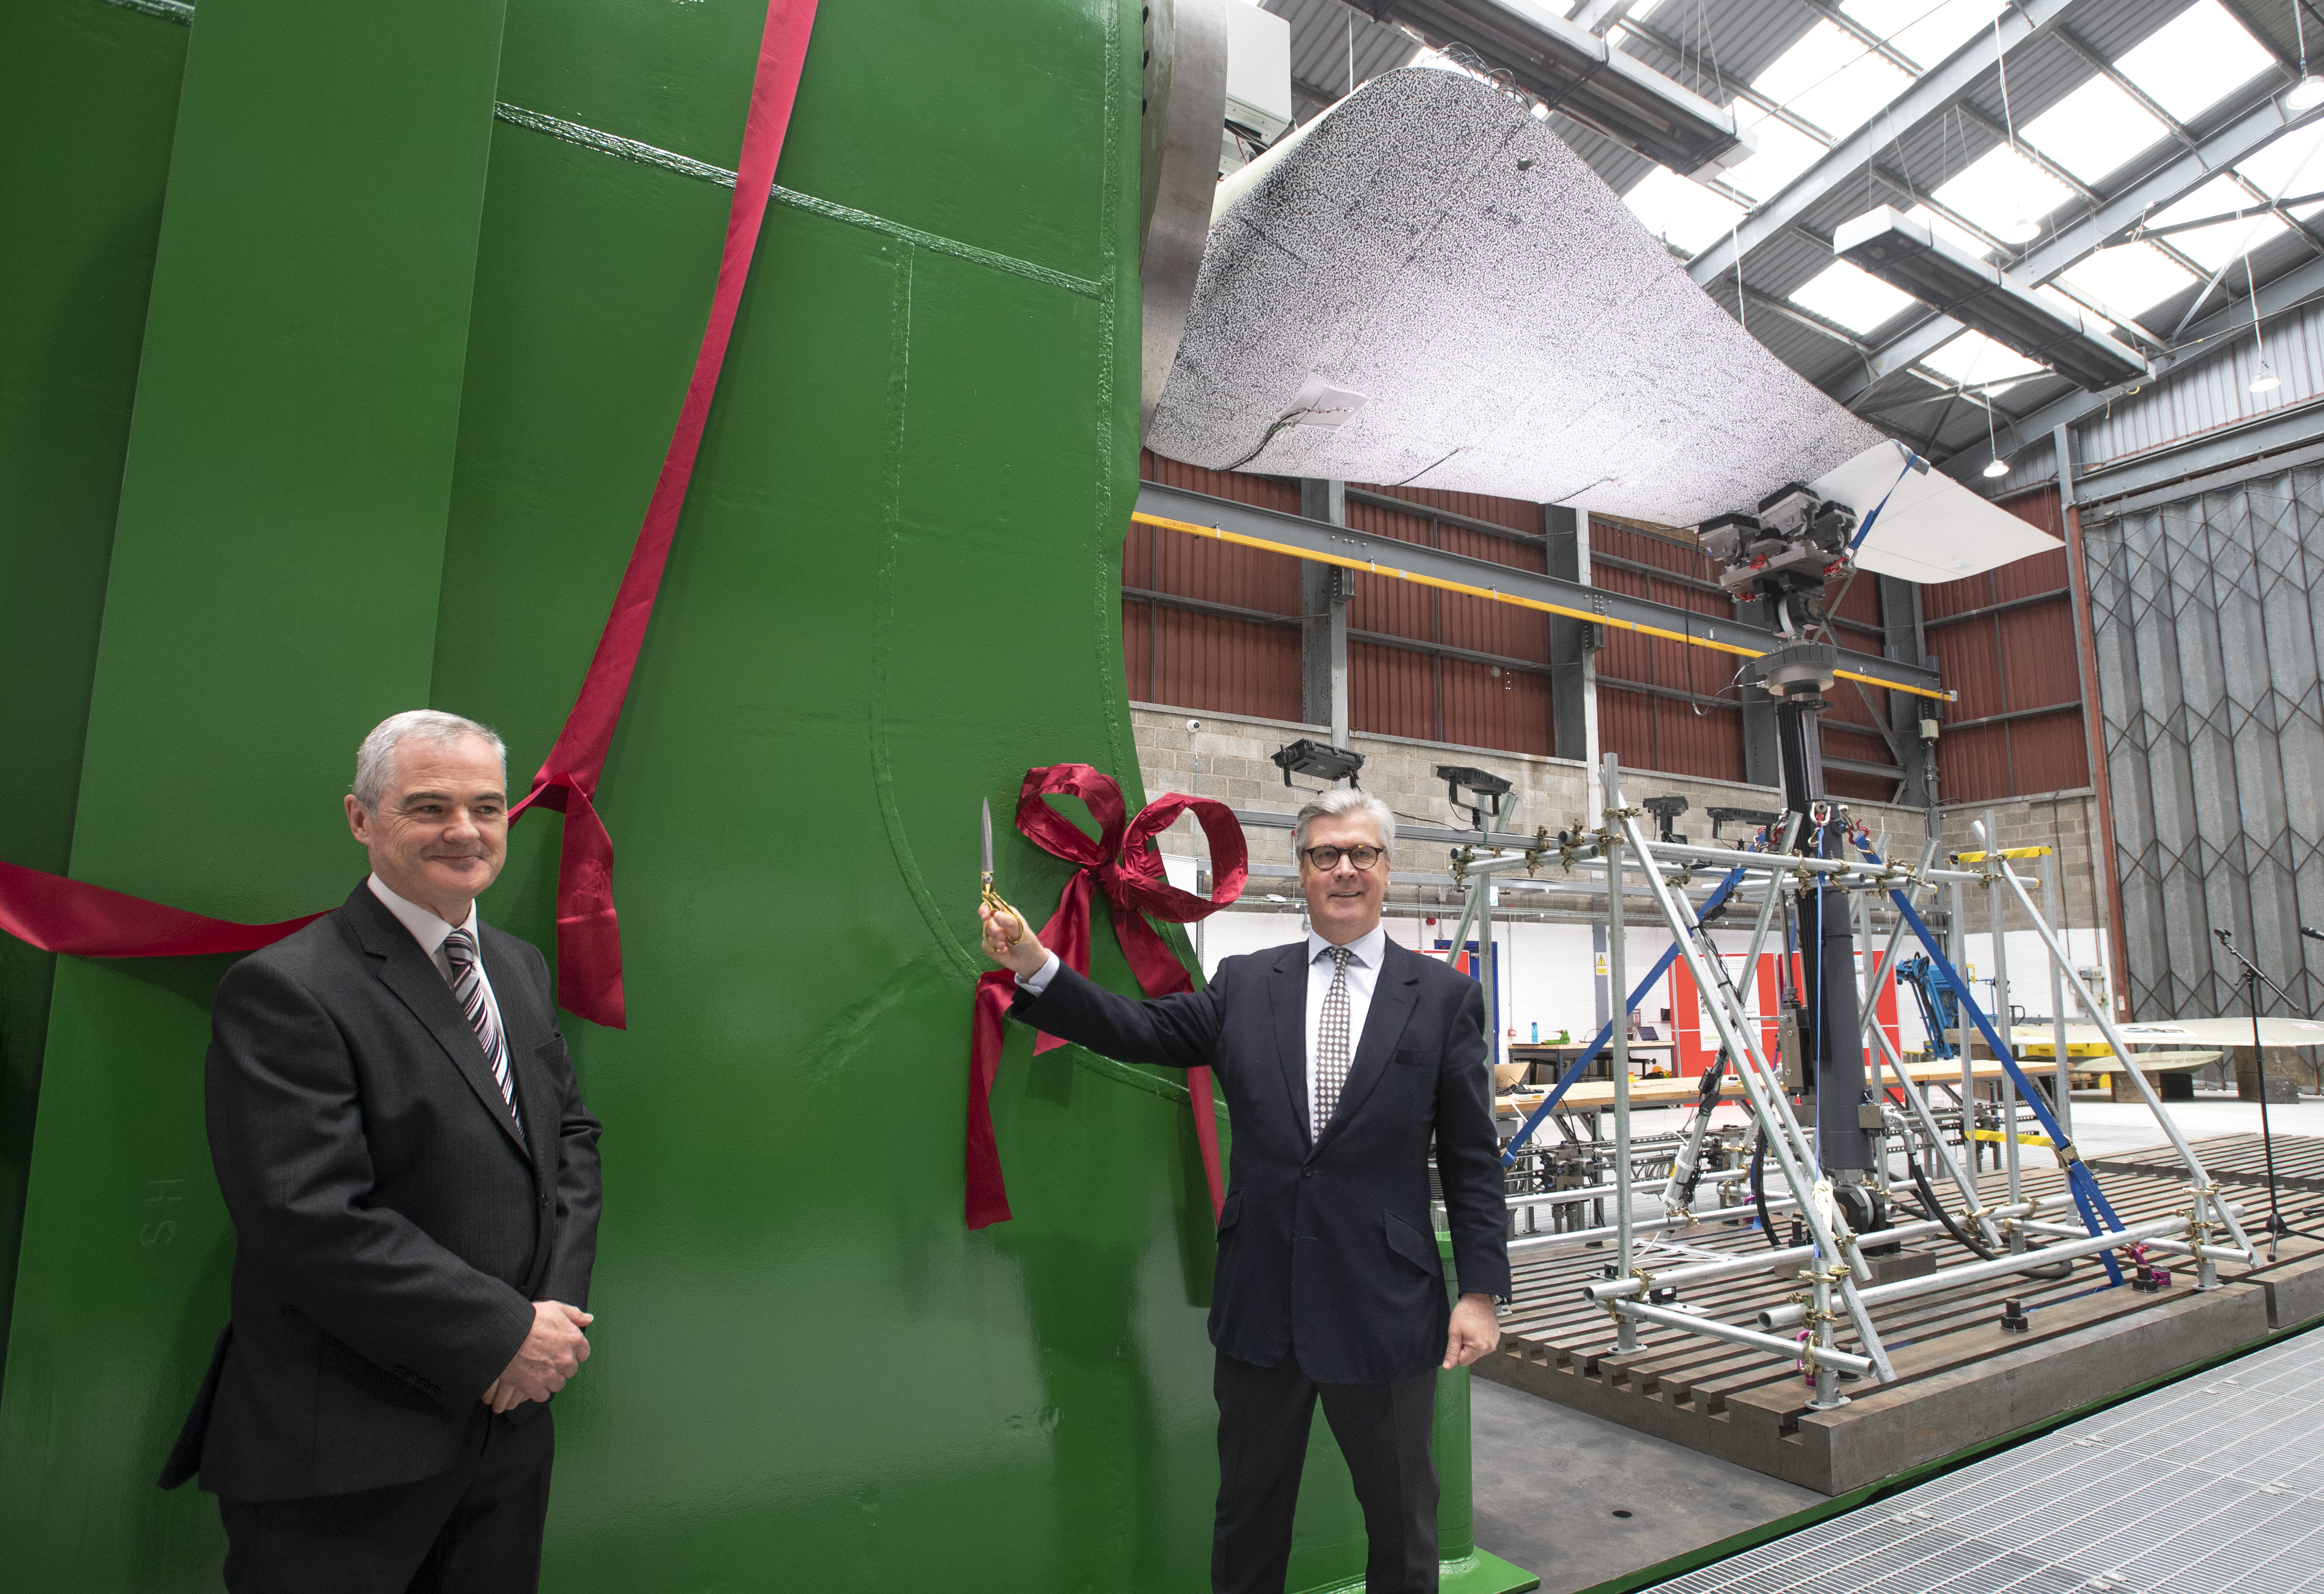 Image of ribbon cutting ceremony at FastBlade facility in Rosyth, Fife